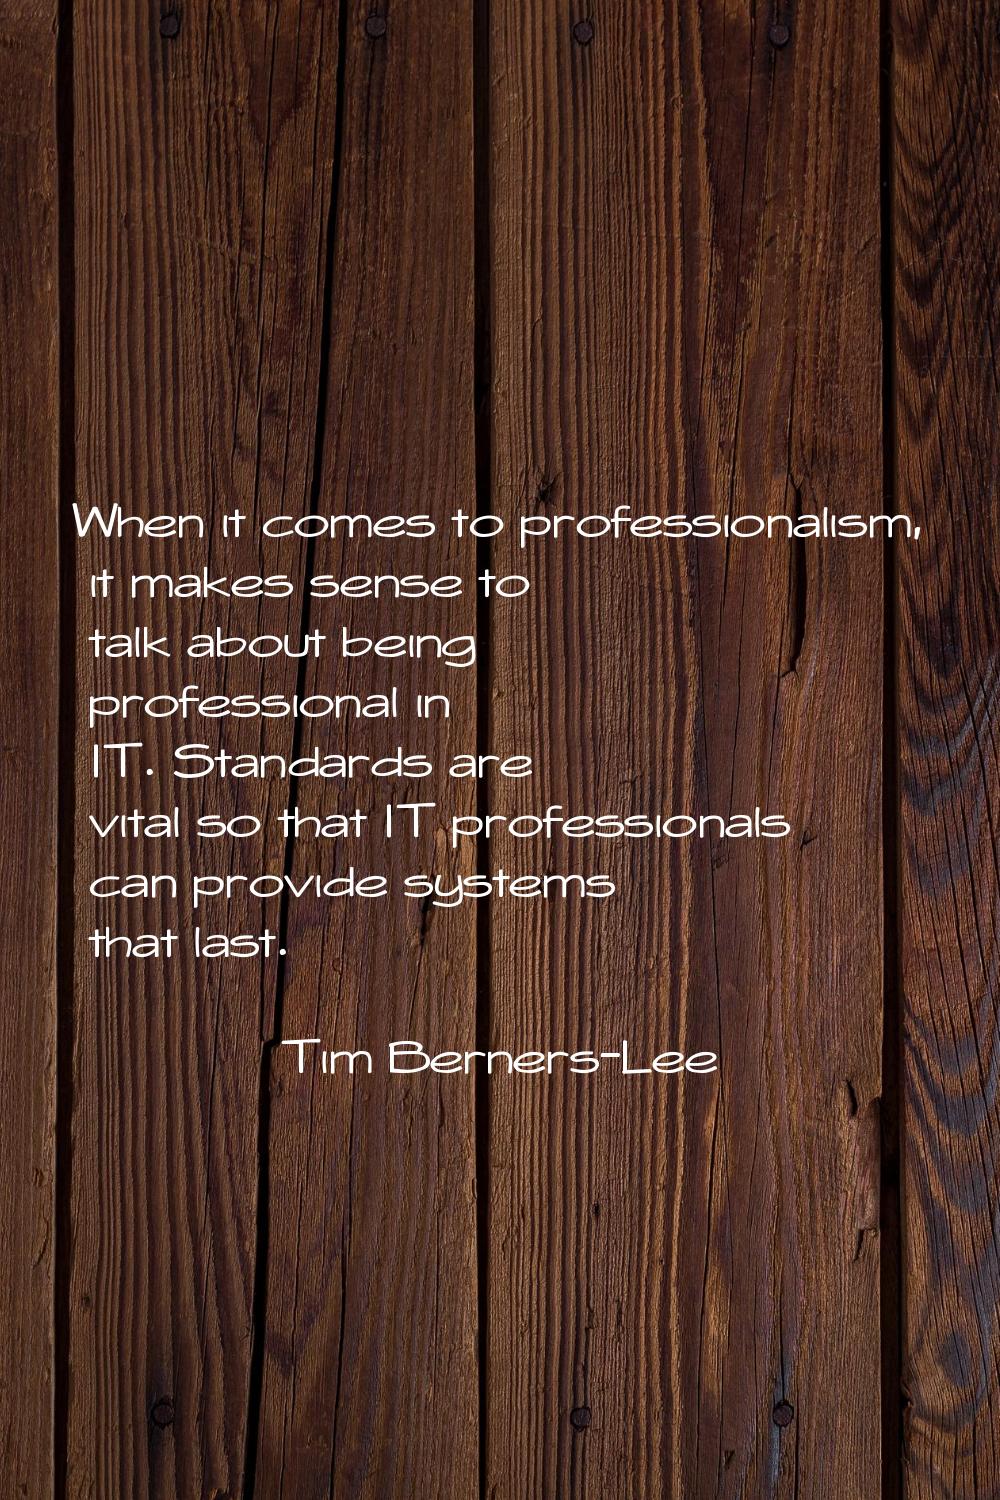 When it comes to professionalism, it makes sense to talk about being professional in IT. Standards 